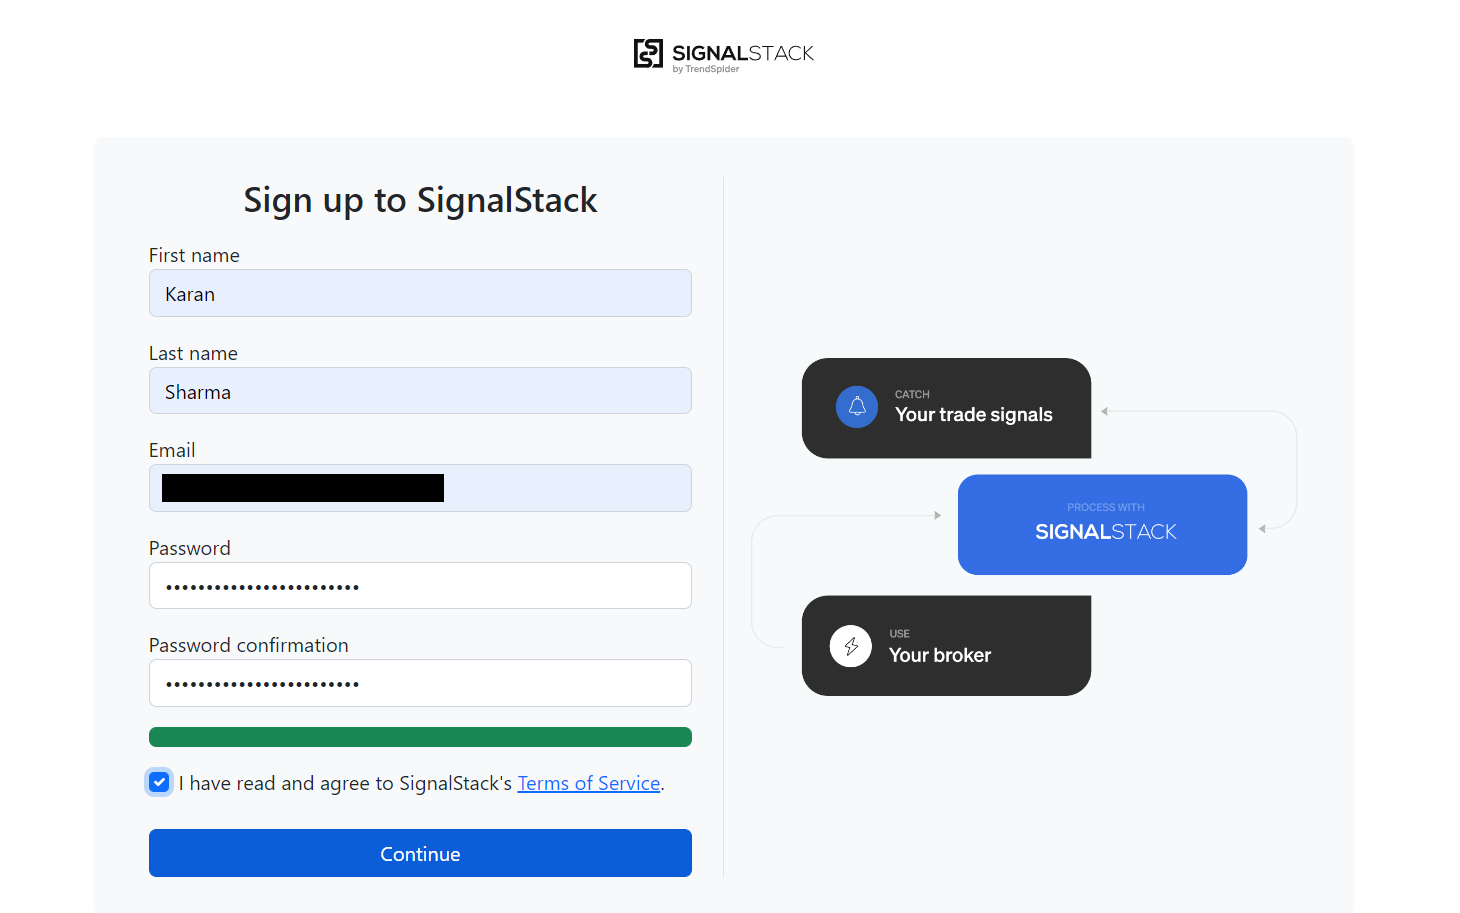 Sign up to SignalStack